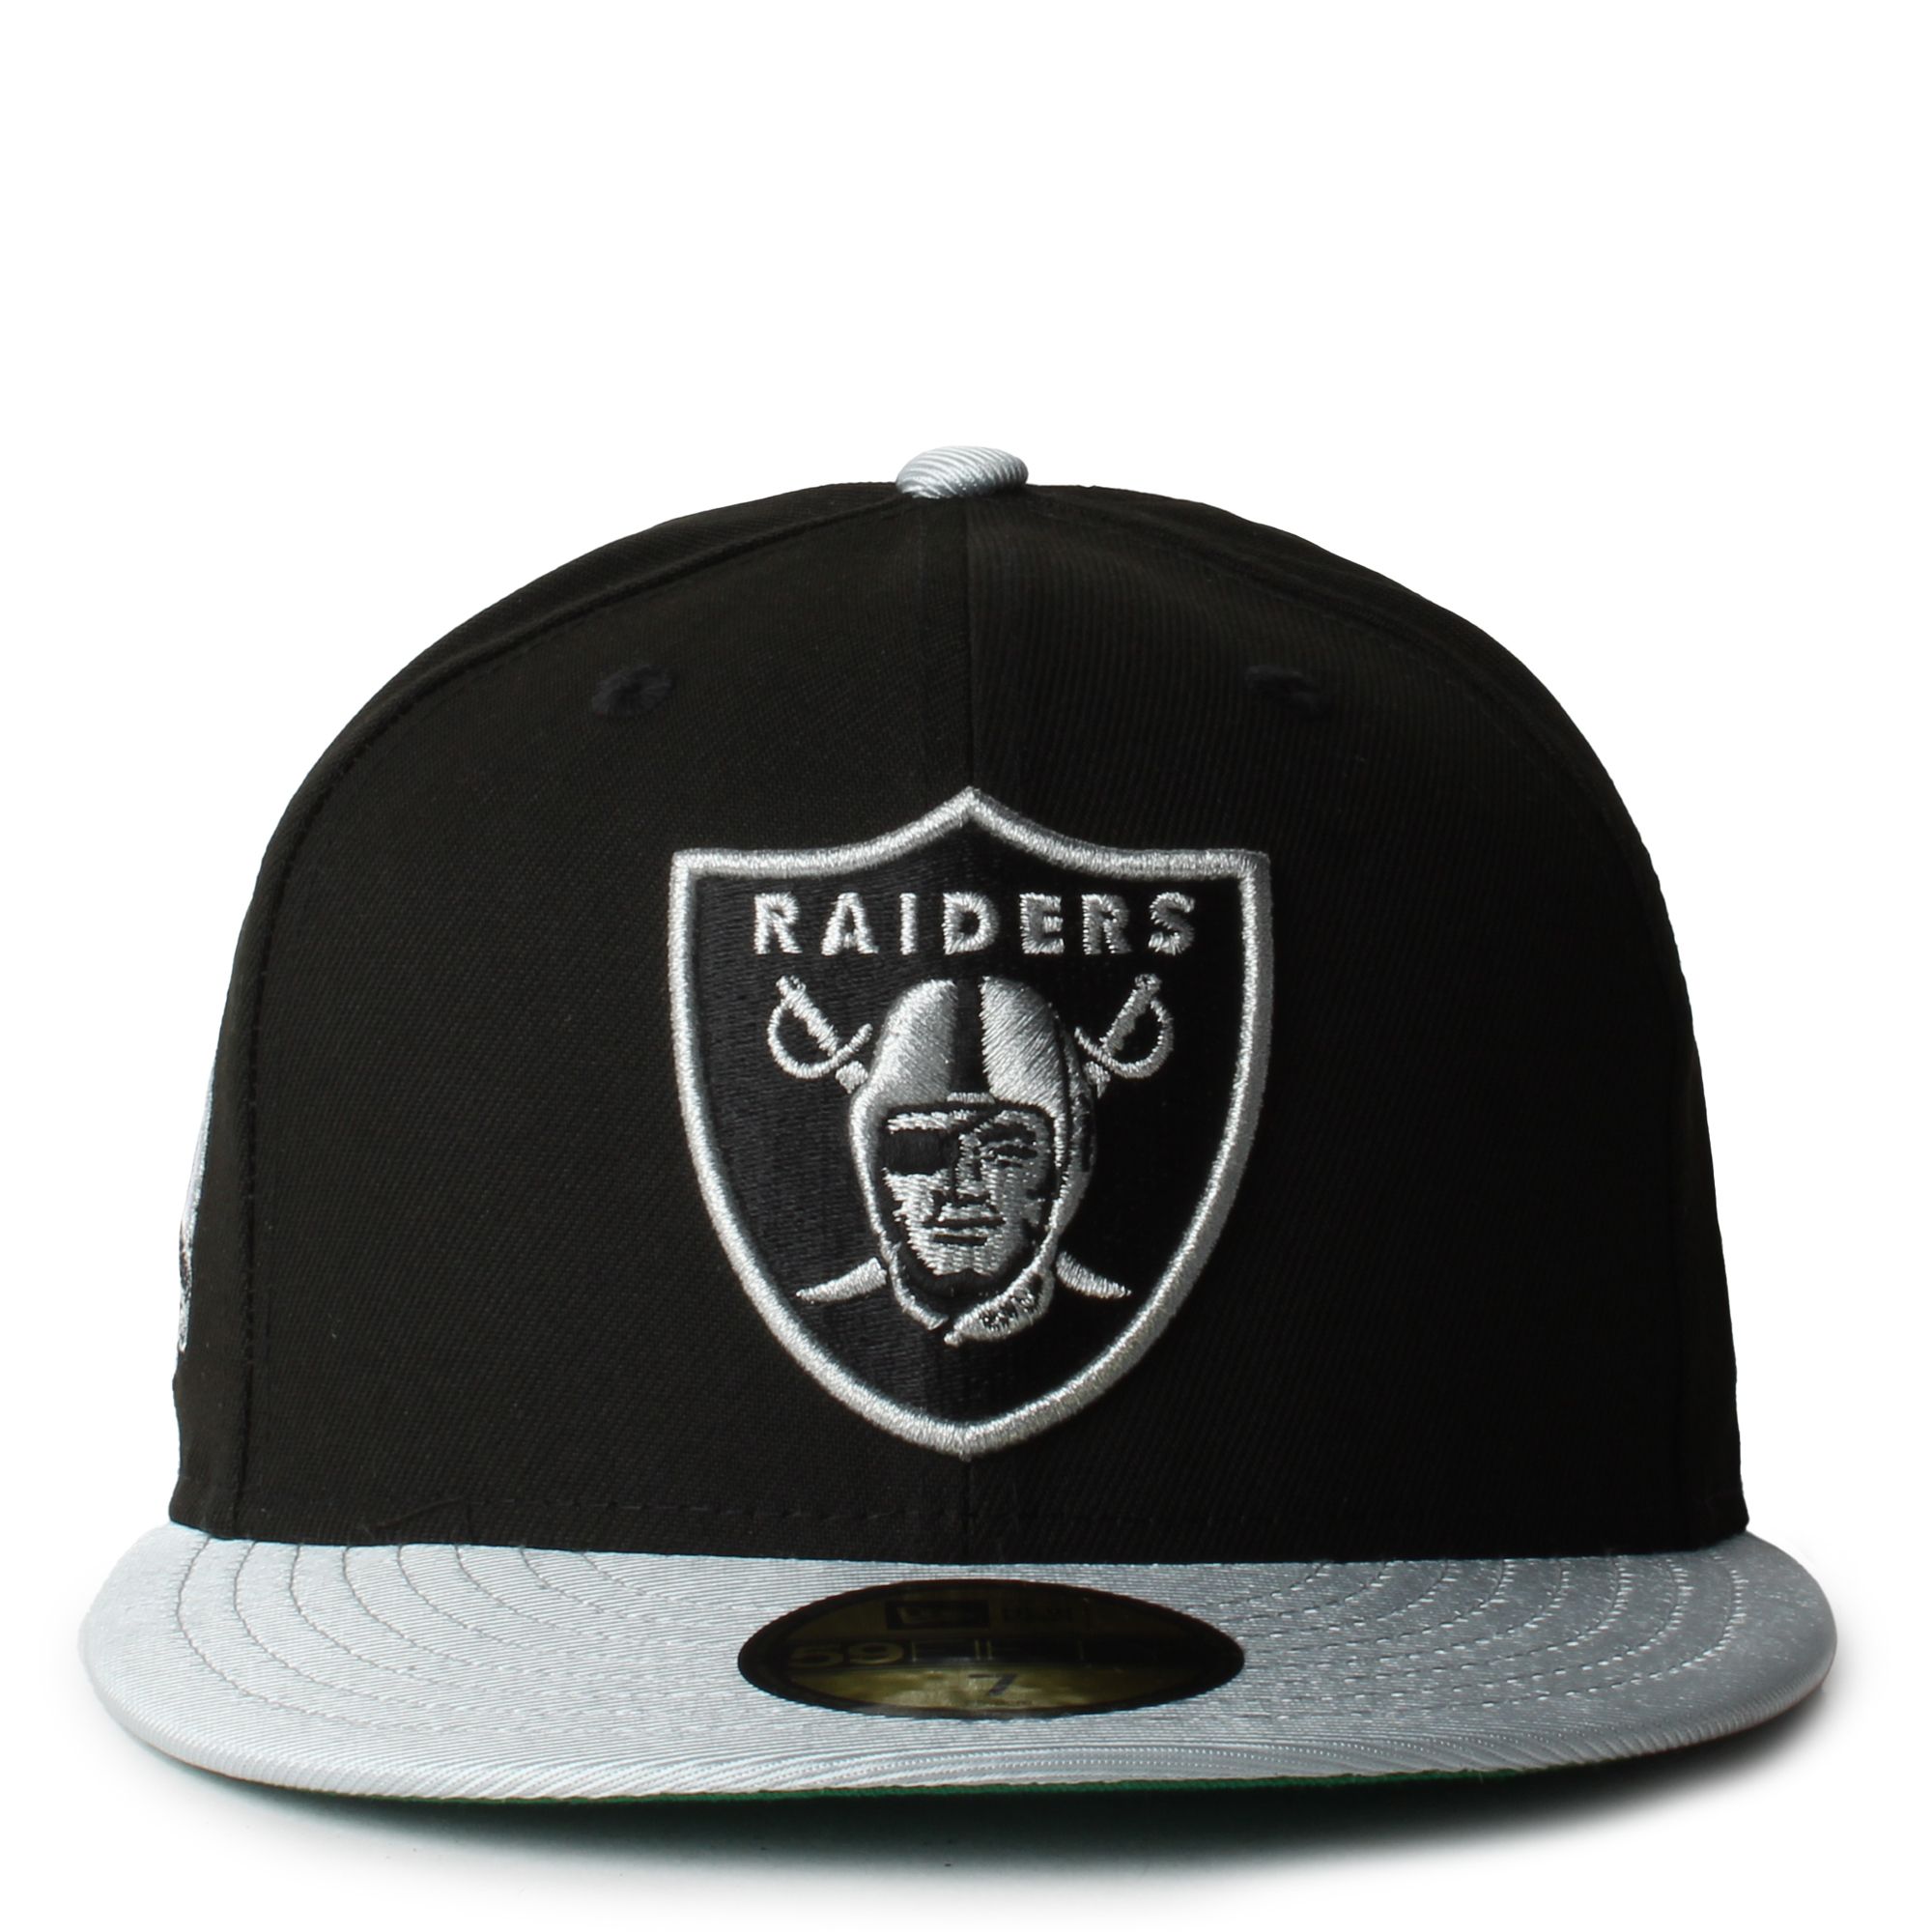 New Era 59FIFTY Las Vegas Raiders Fitted Hat Black White